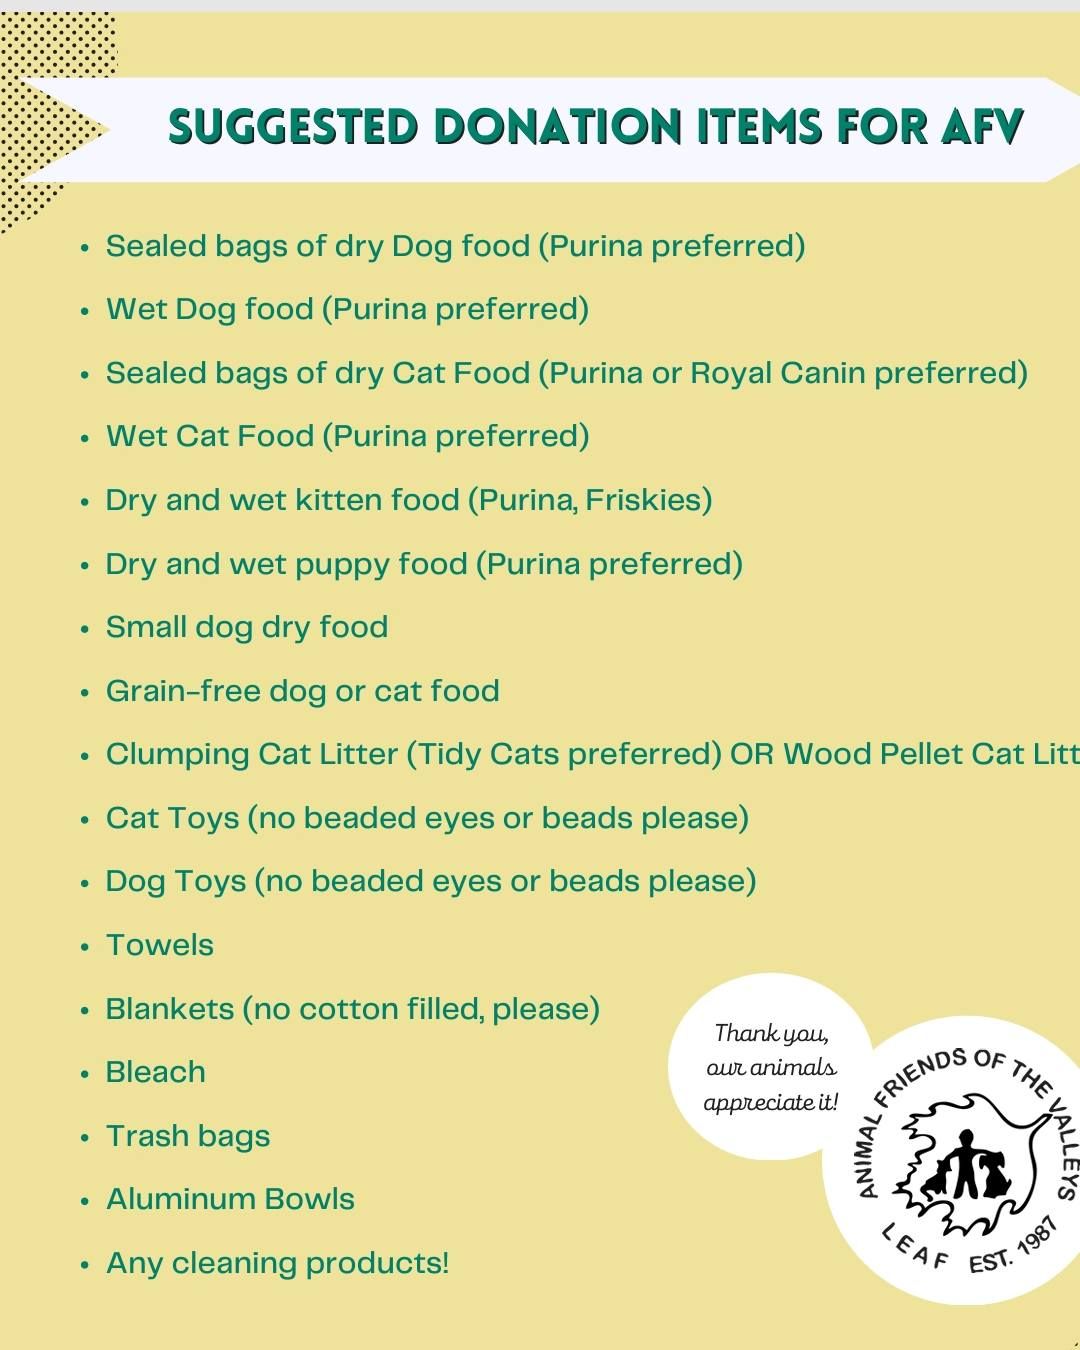 Animal Friends of the Valley Donation Drive